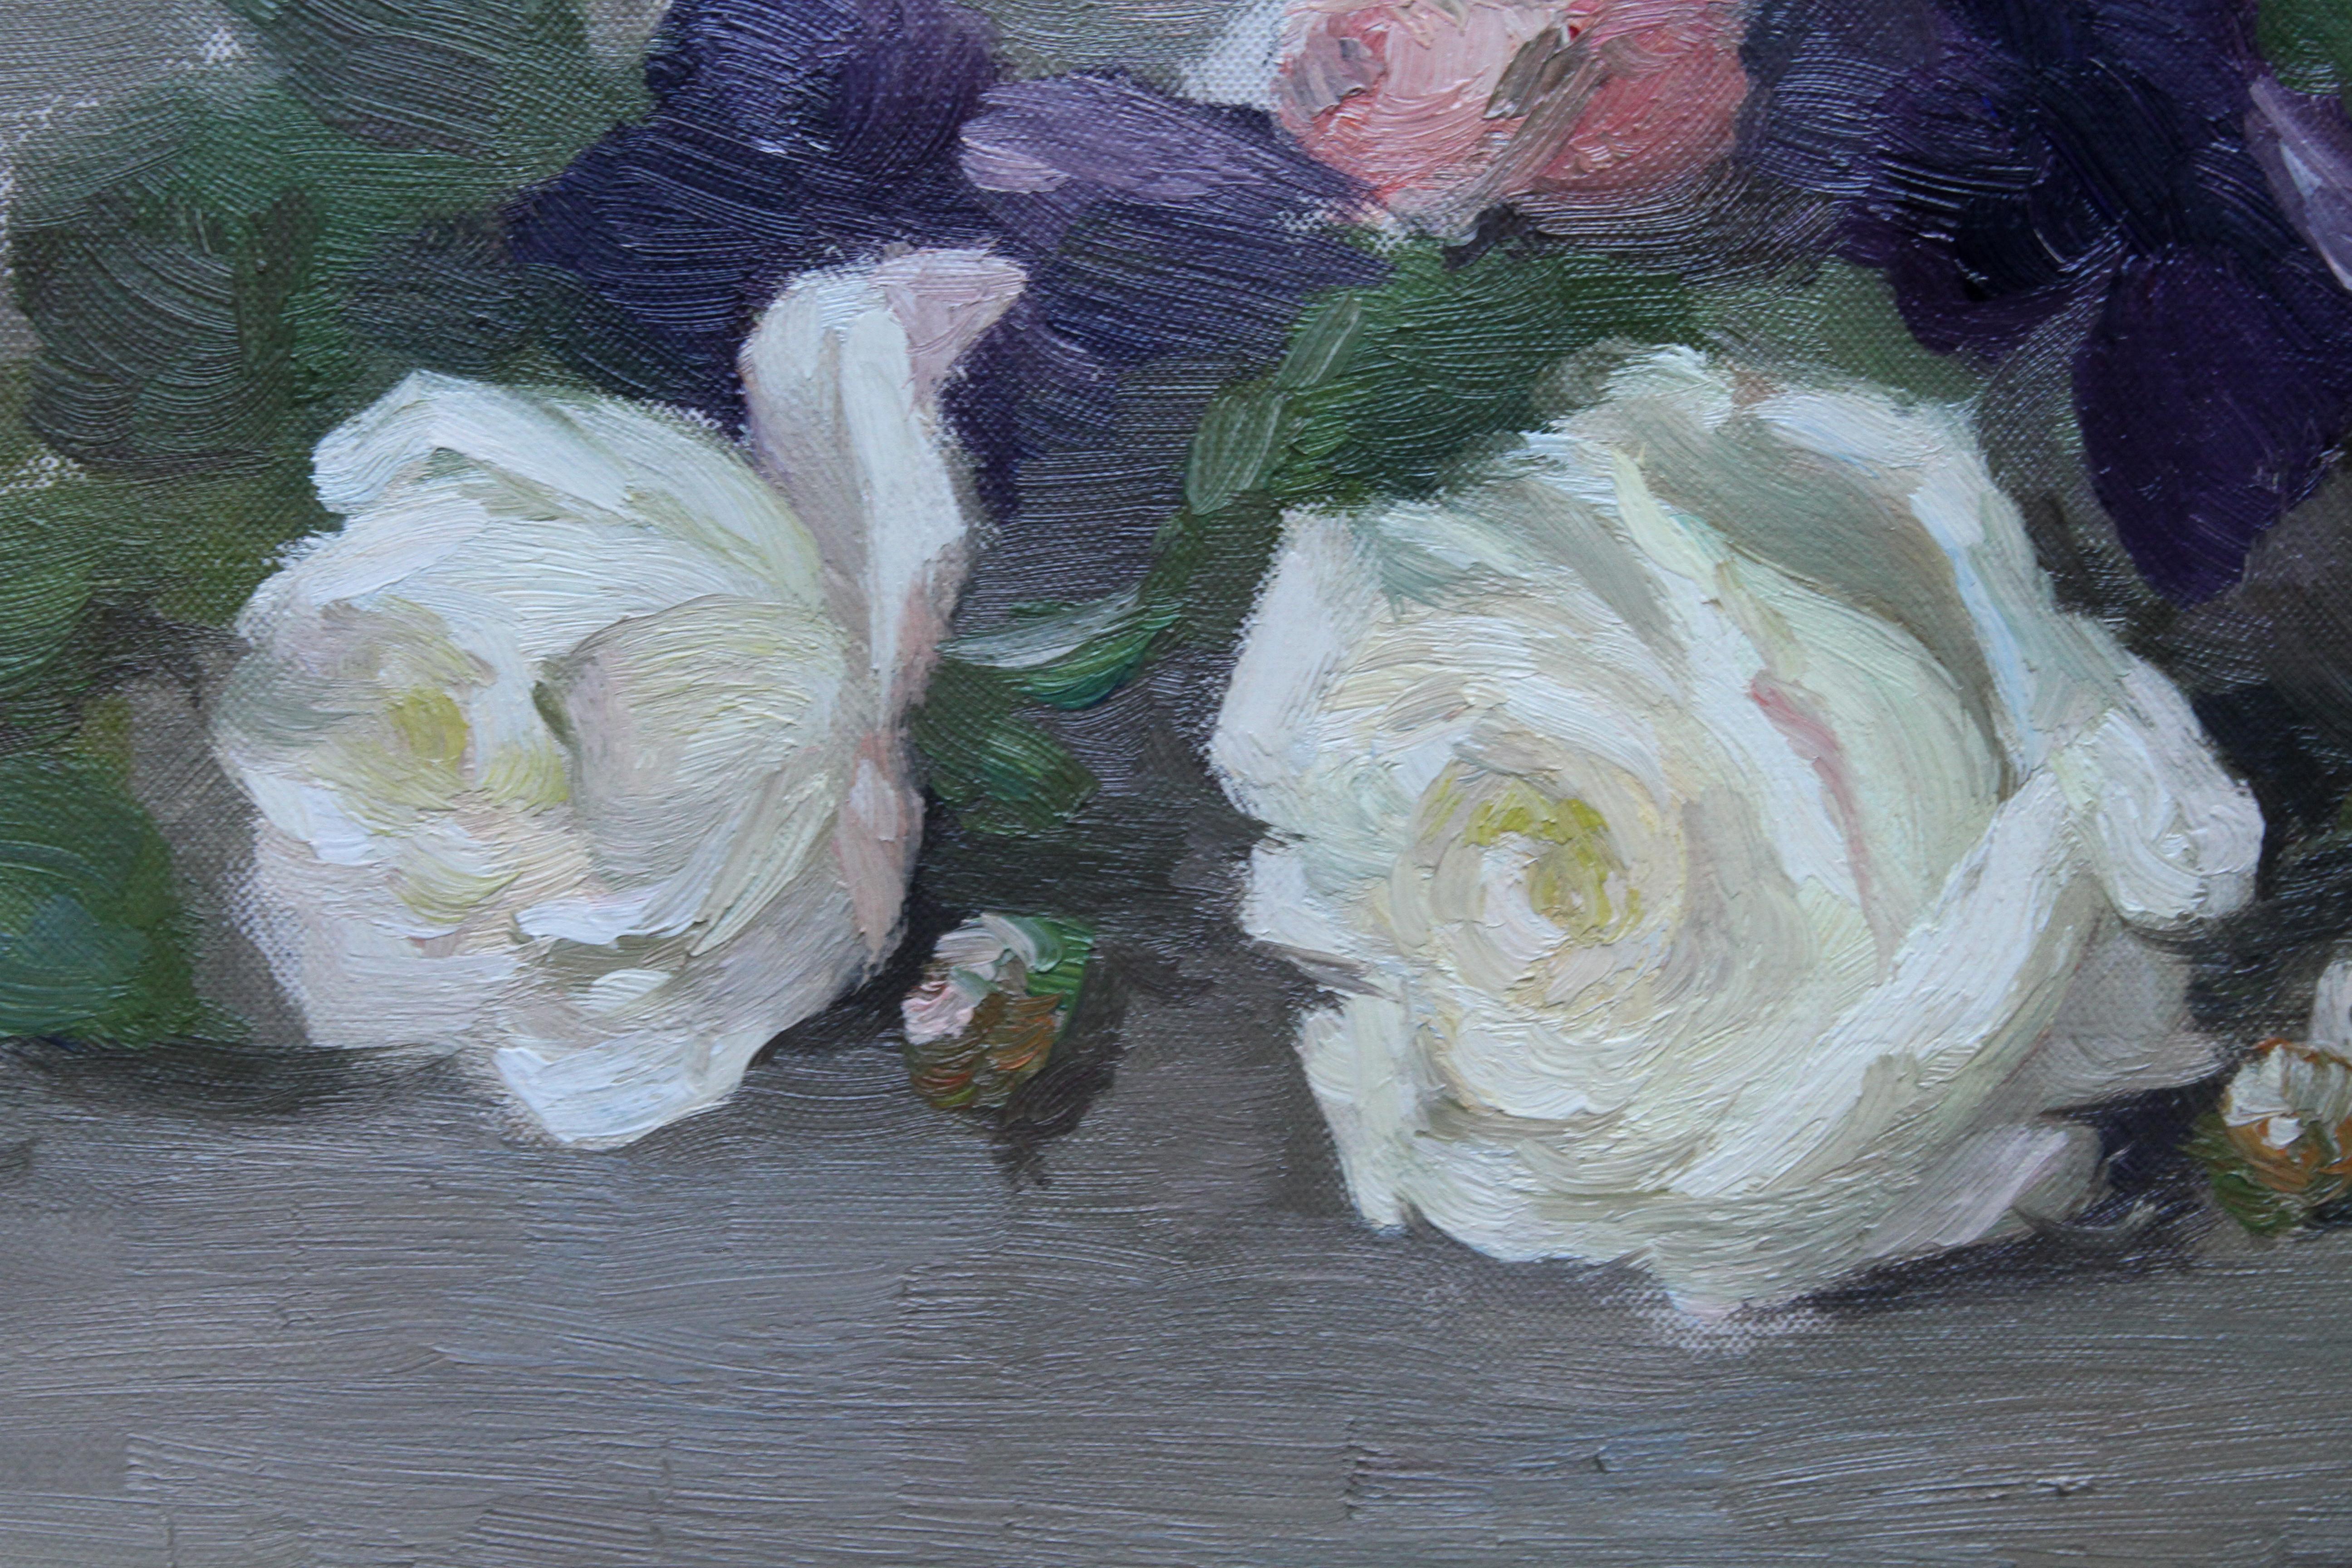 Roses and Violets - Scottish Edwardian art floral oil painting exhib 1908 RSA For Sale 1